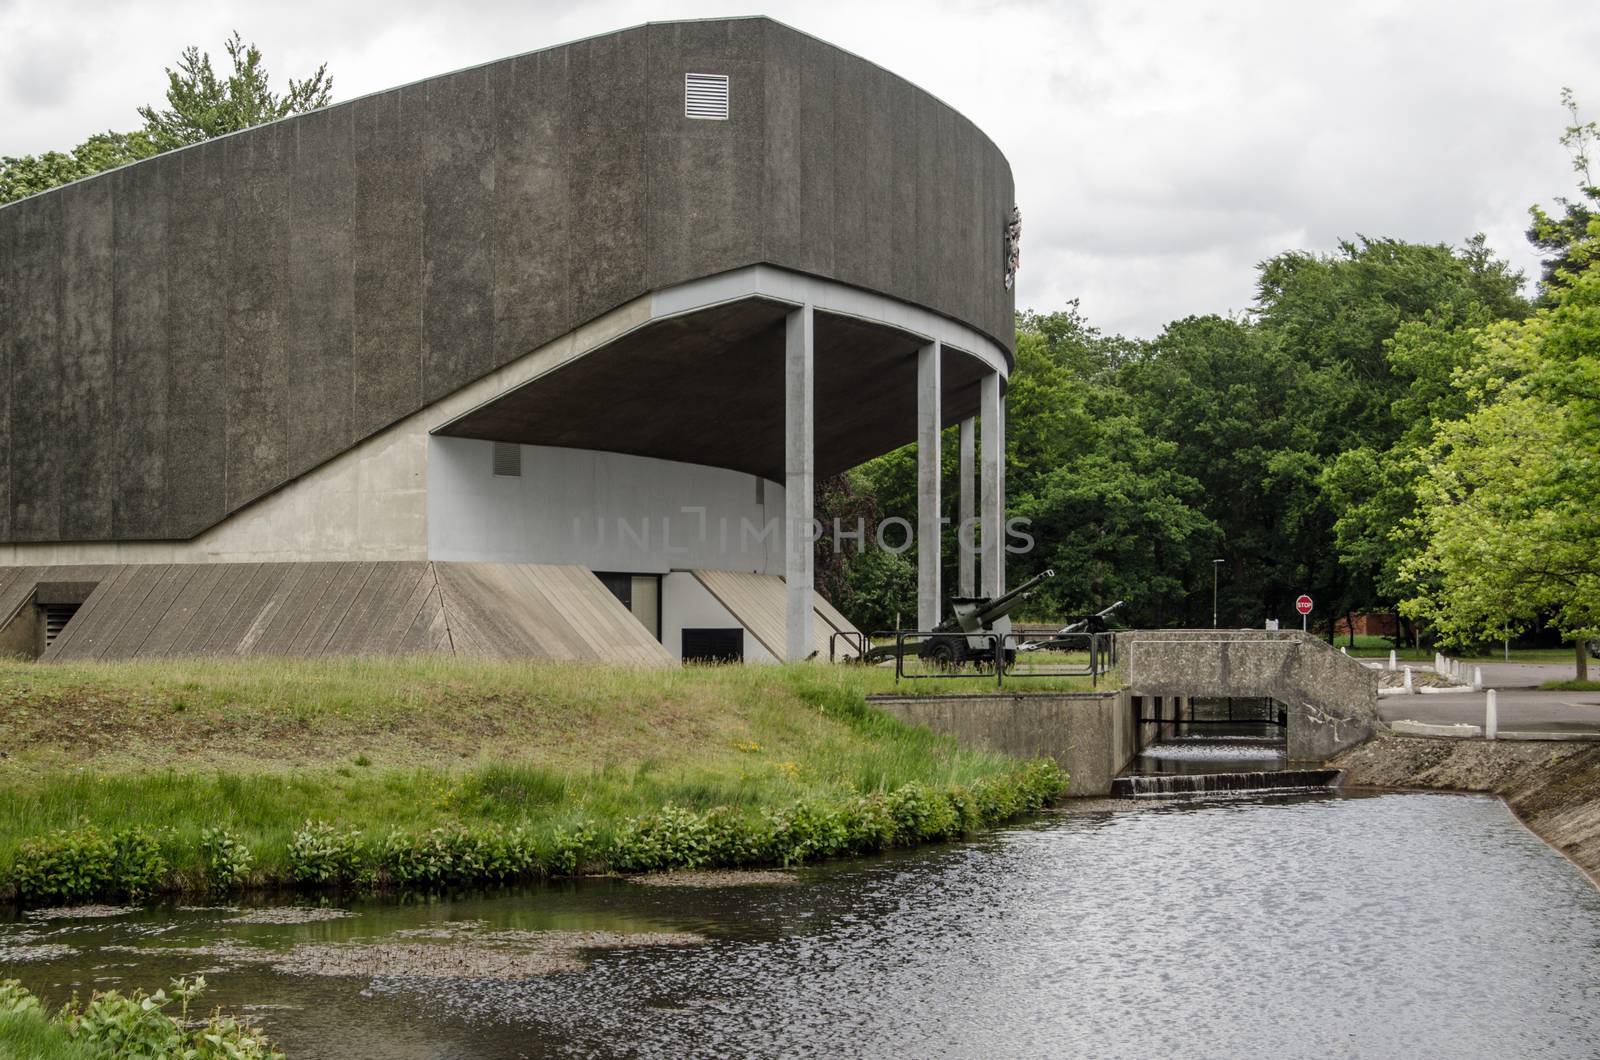 View of the brutalist Churchill Hall lecture theatre with the  Wish Stream brook running past at the Royal Military Academy in Sandhurst, Berkshire.